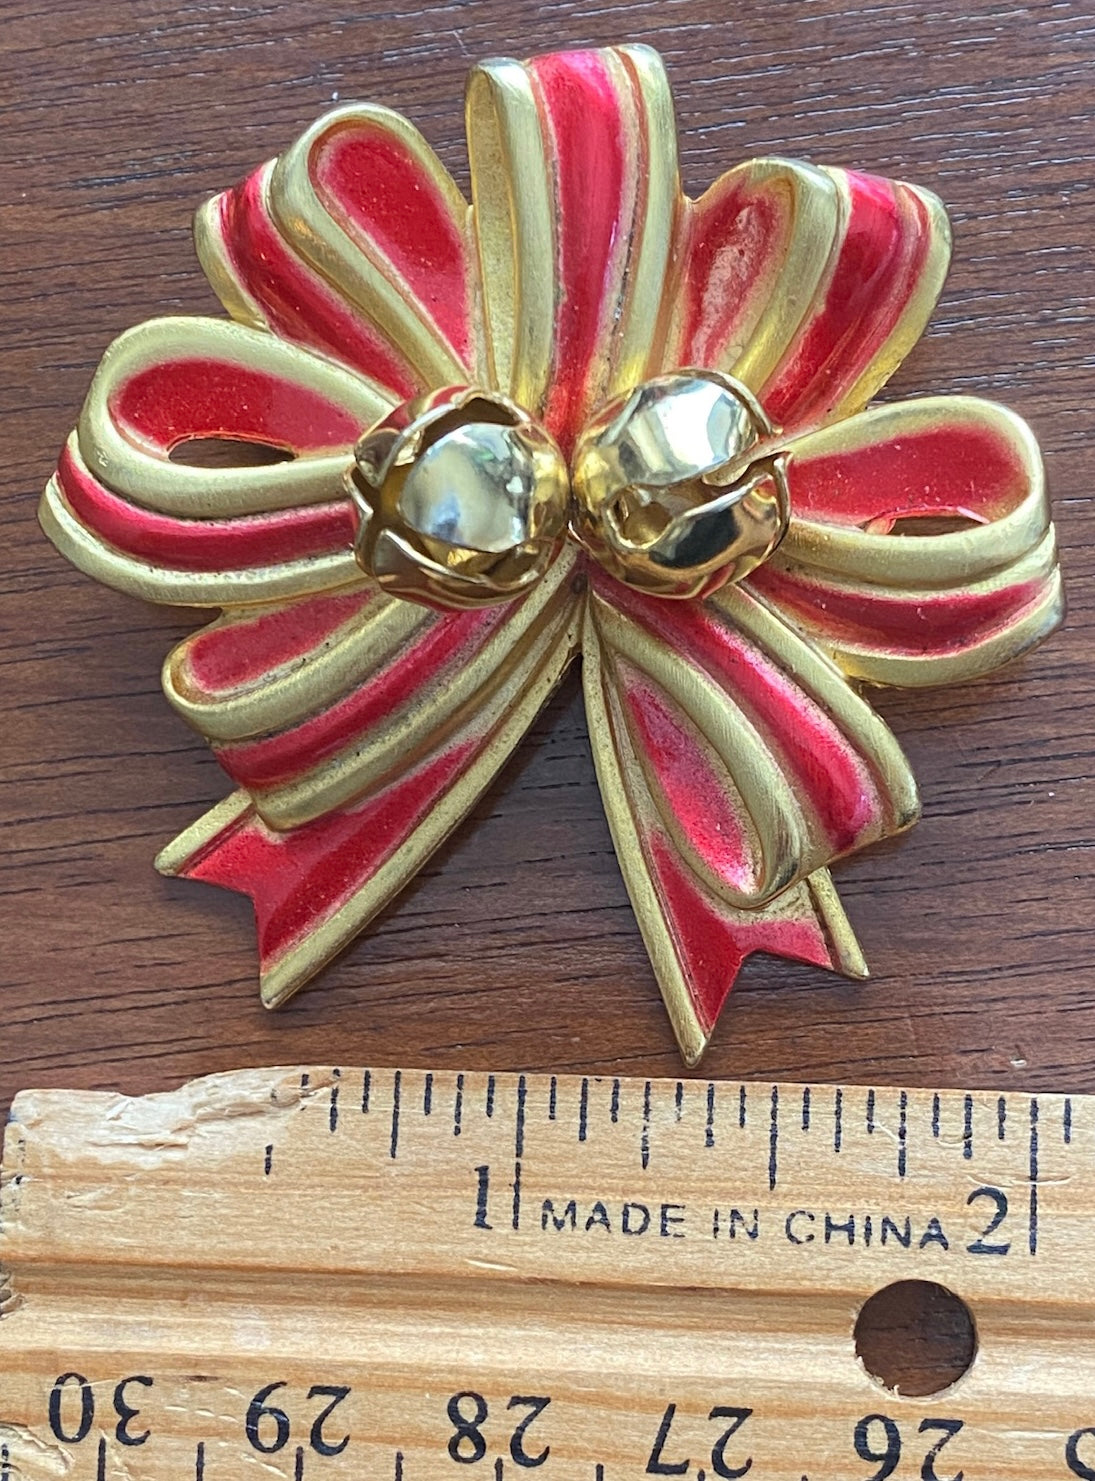 Large Vintage JJ Signed Red Gold Tone Ribbon Bow Brooch Pin with Bells